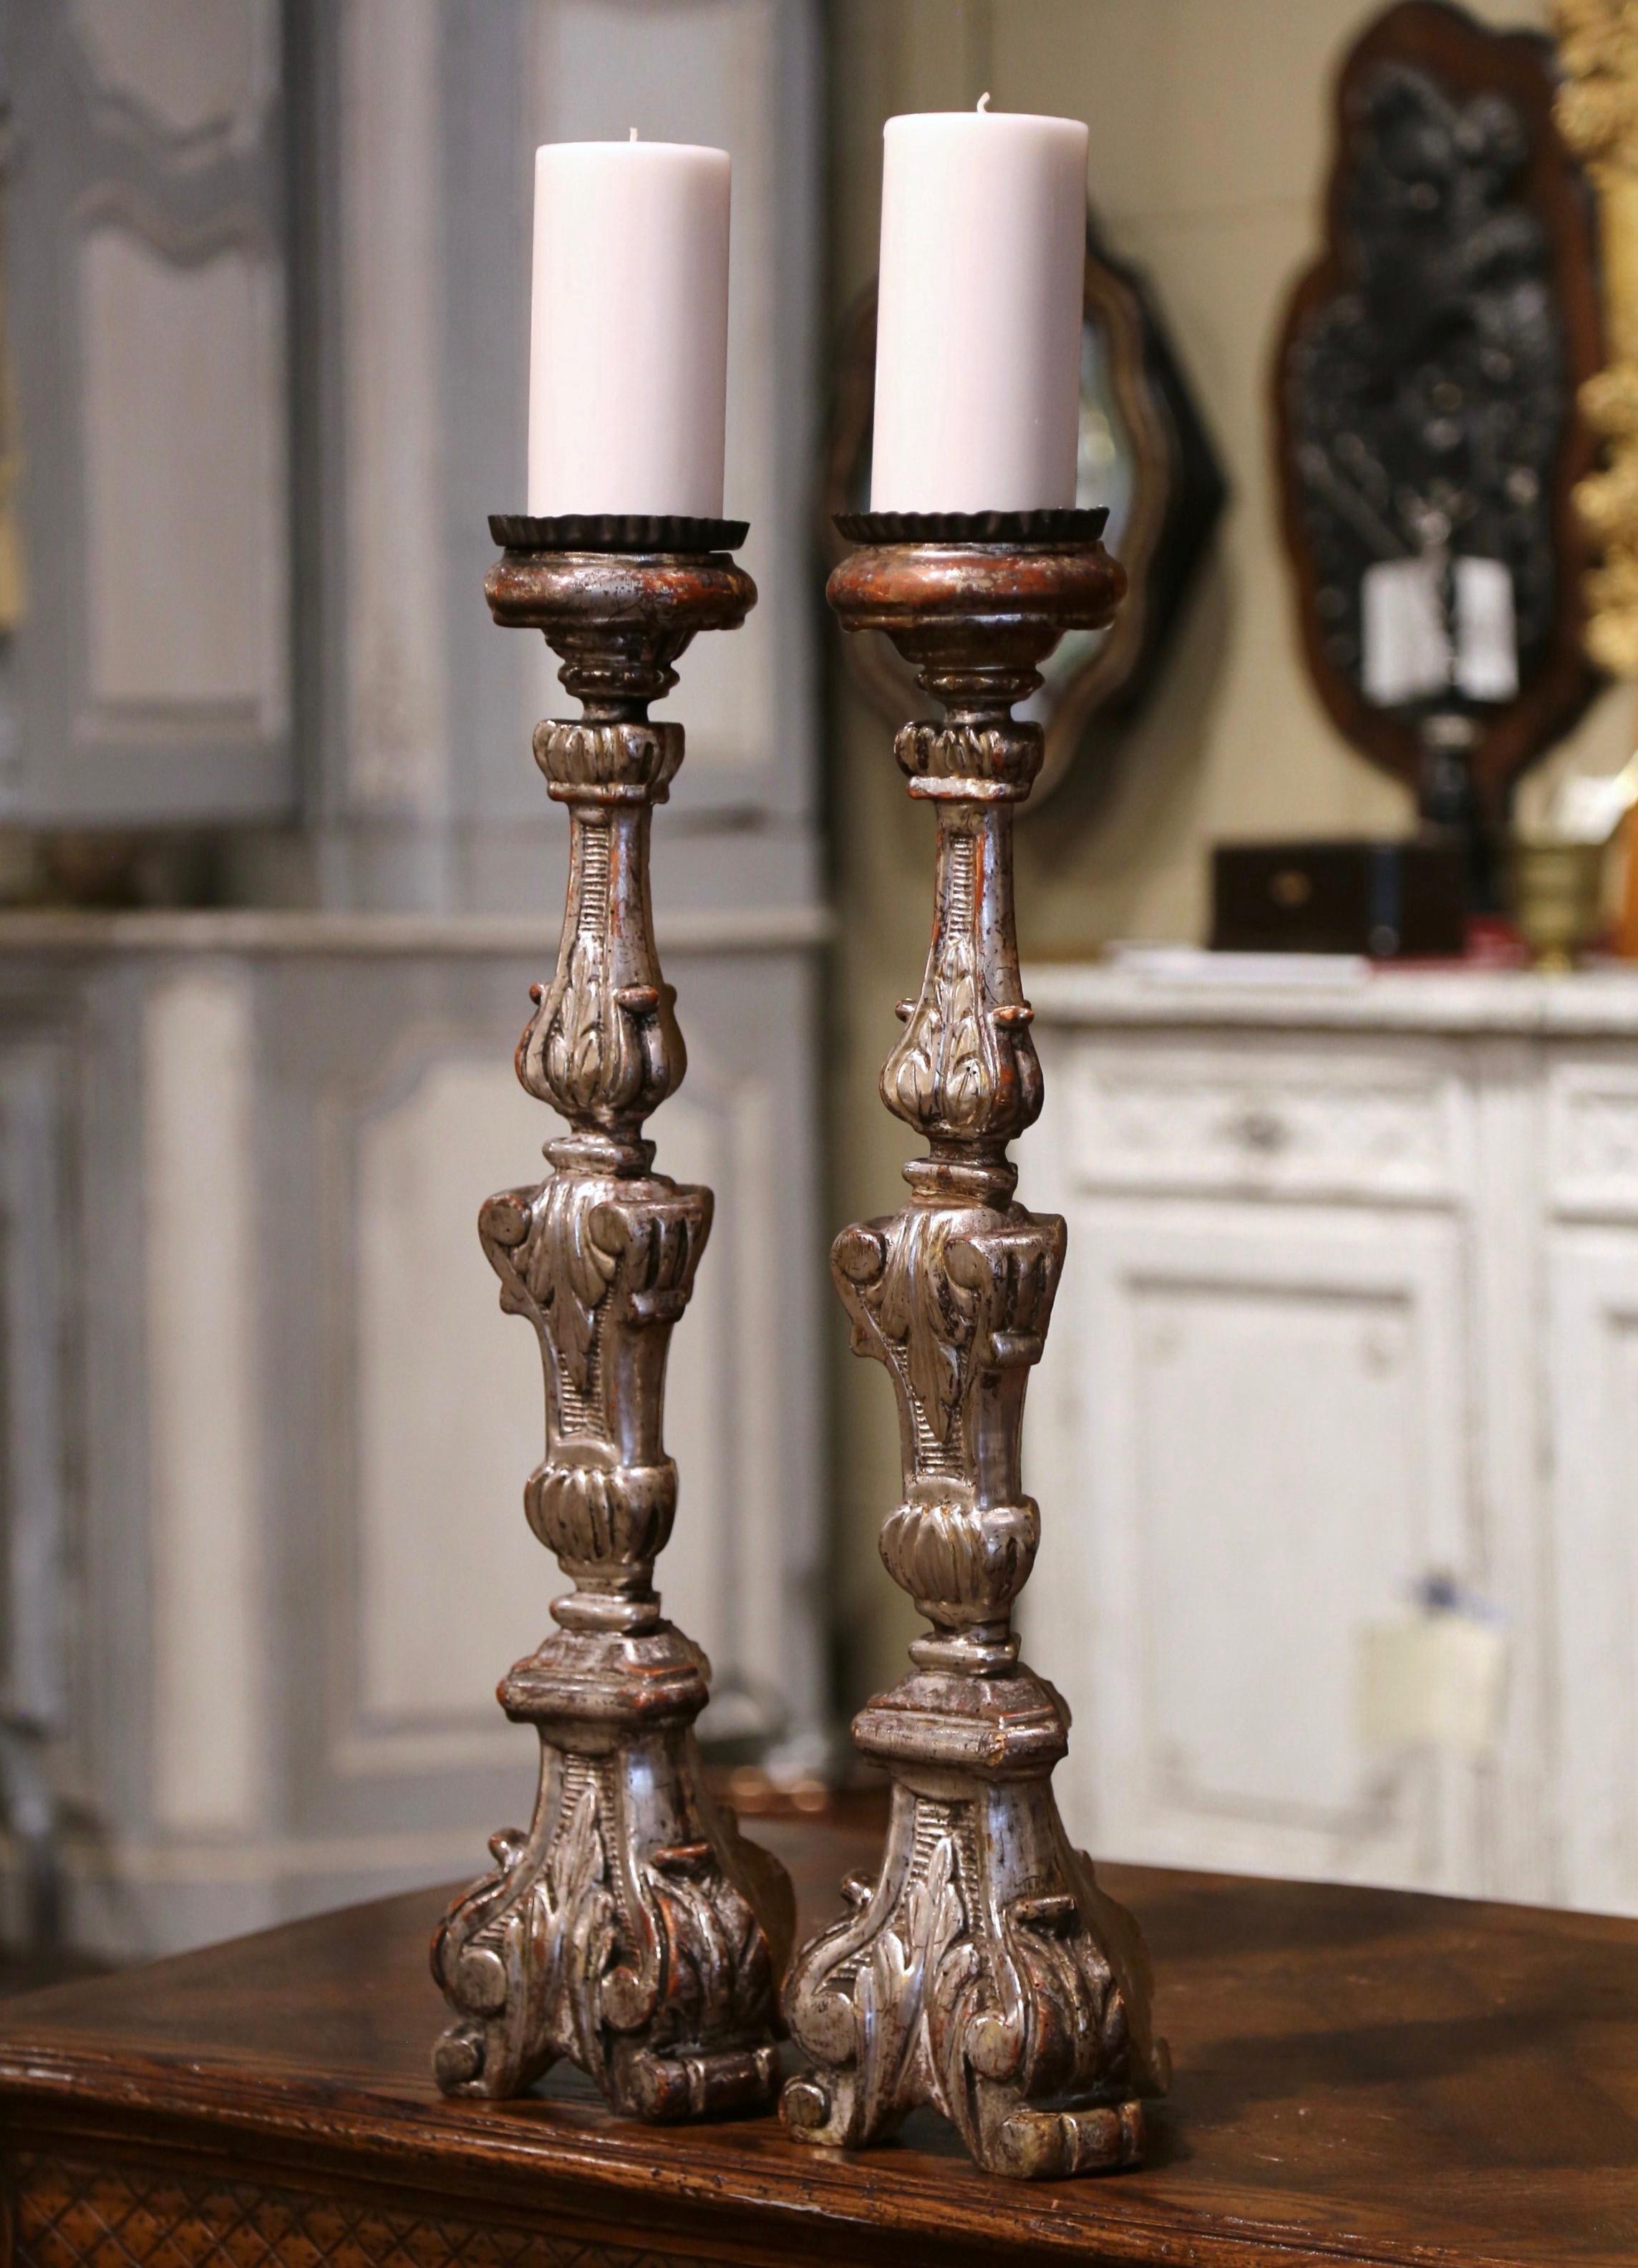 Add an air of elegance to your home with this pair of antique candlesticks. Crafted in Italy circa 1880, each candle holder stands on a sturdy triangle base decorated with hand carved acanthus leaf motifs over a carved stem embellished with foliage